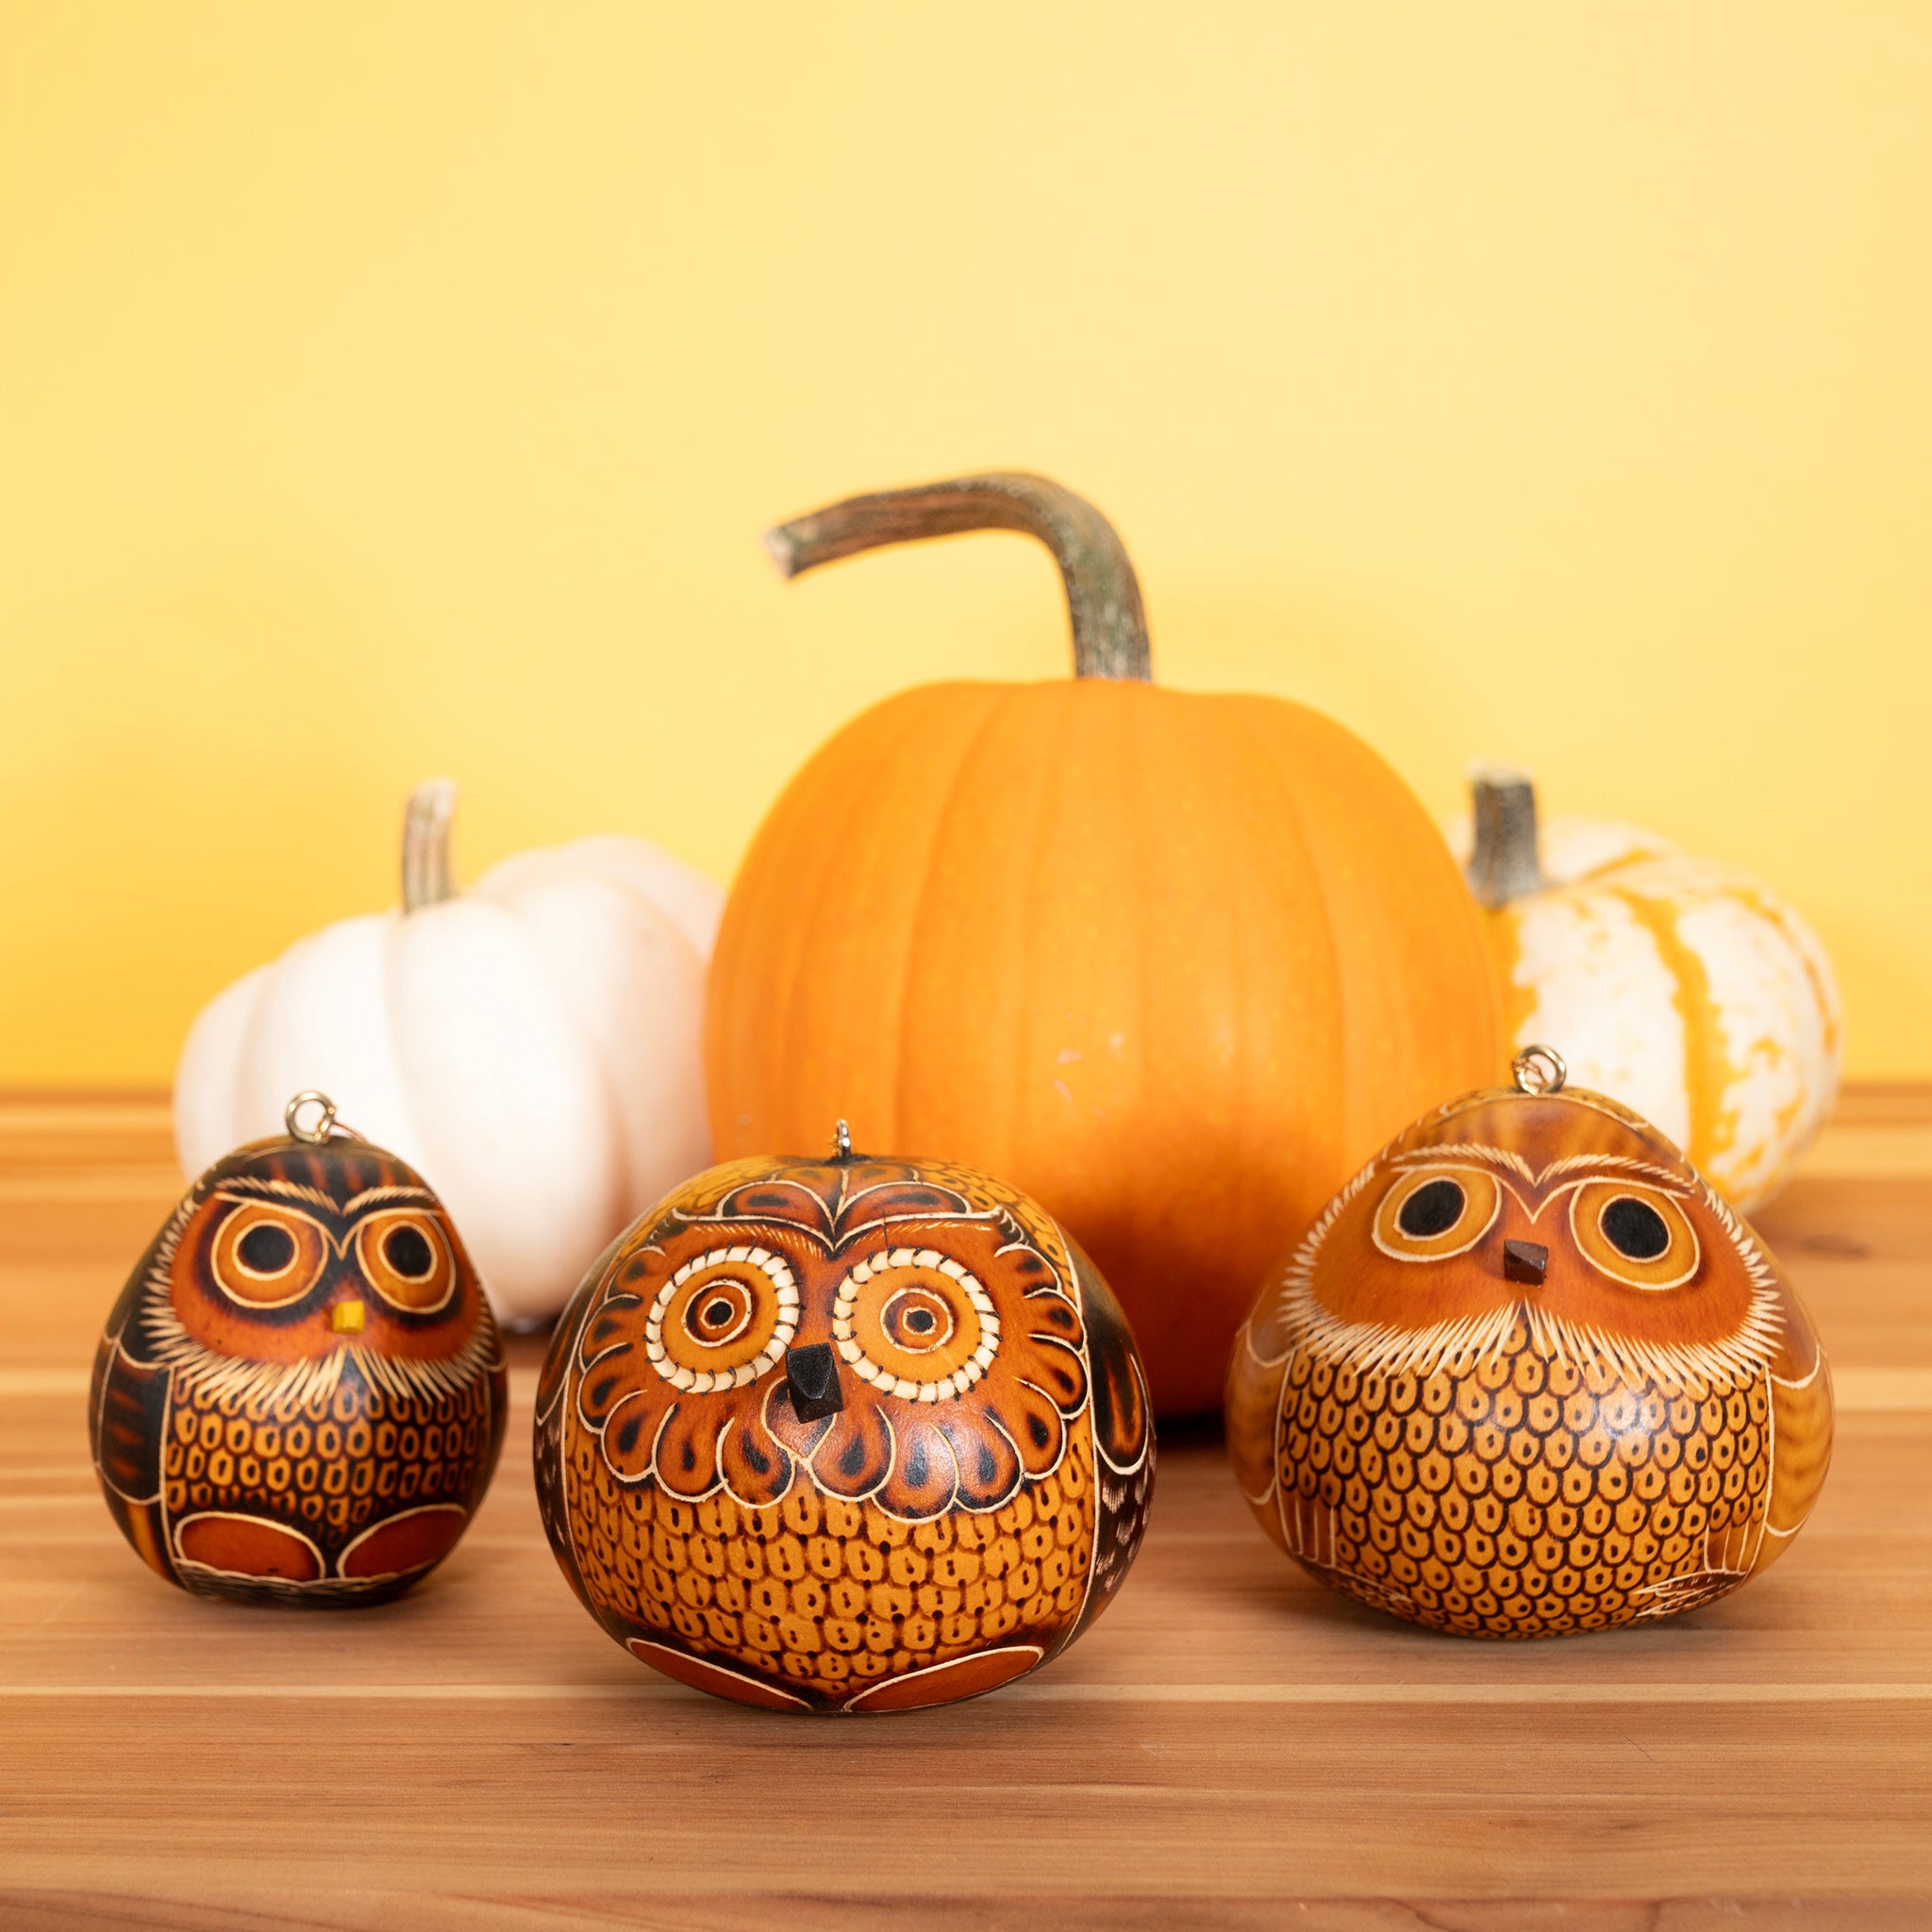 Owls Mix - Gourd Ornament (sold in 20s)